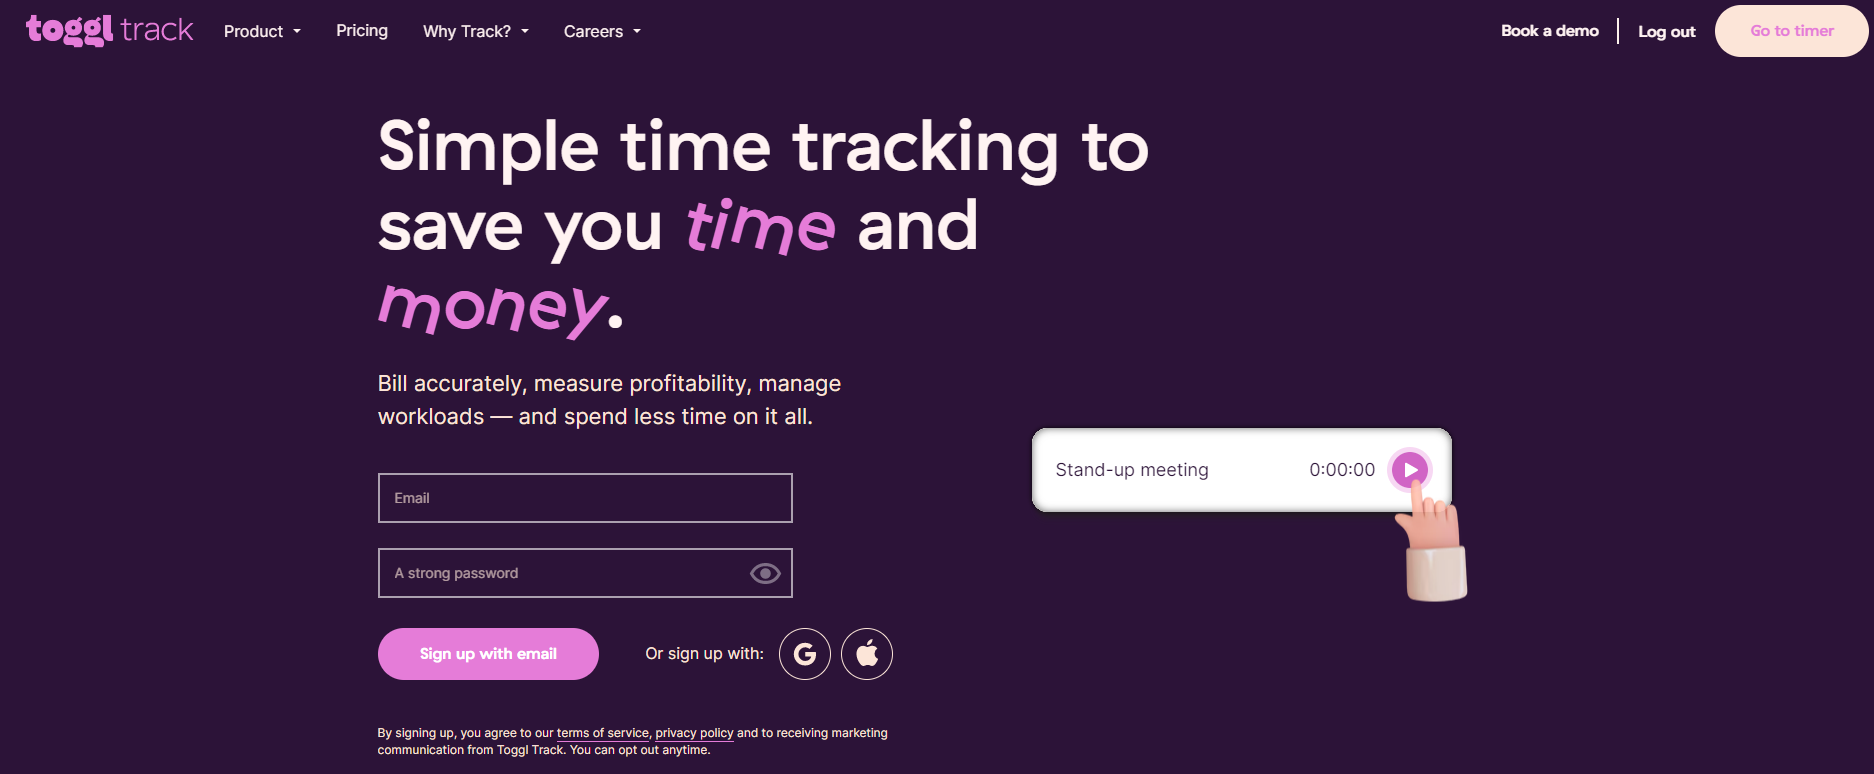 Homepage of toggl track, with sign up options